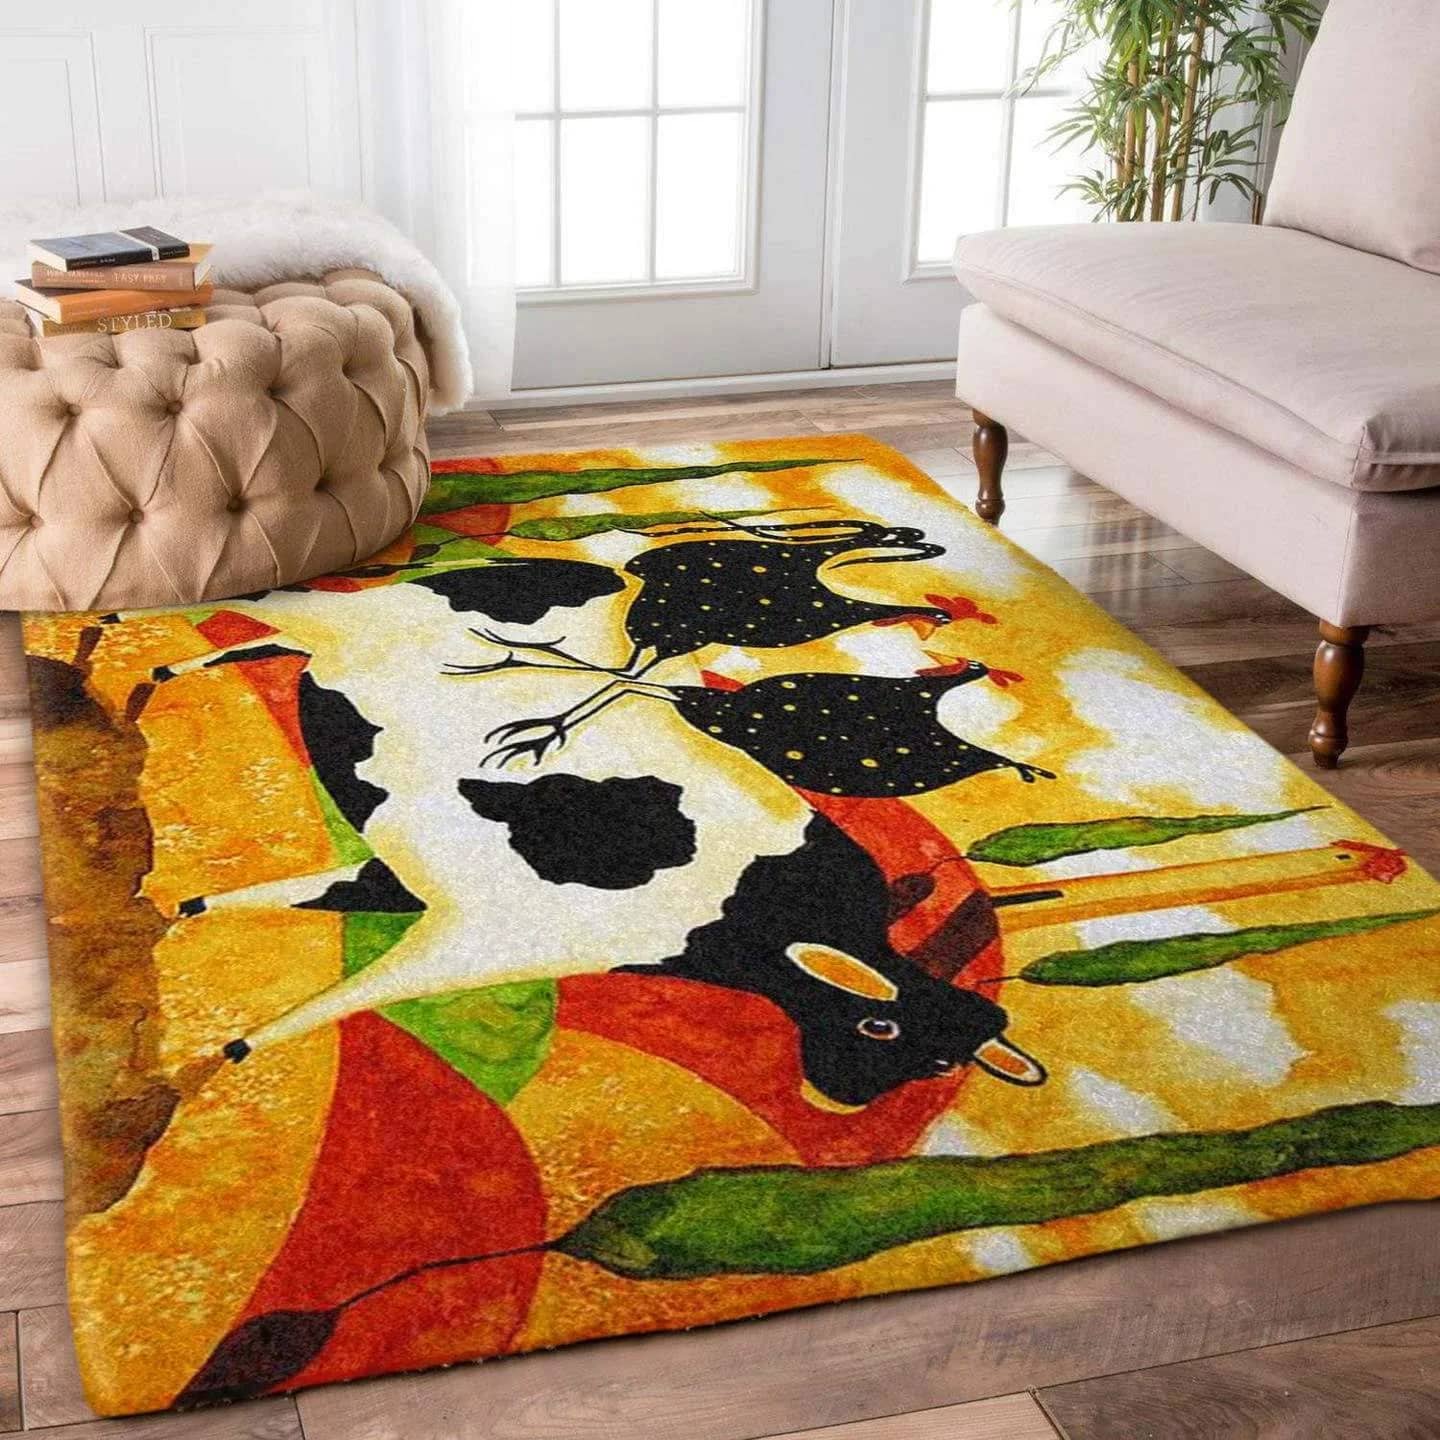 Chicken And Cow Limited Edition Amazon Best Seller Sku 264983 Rug